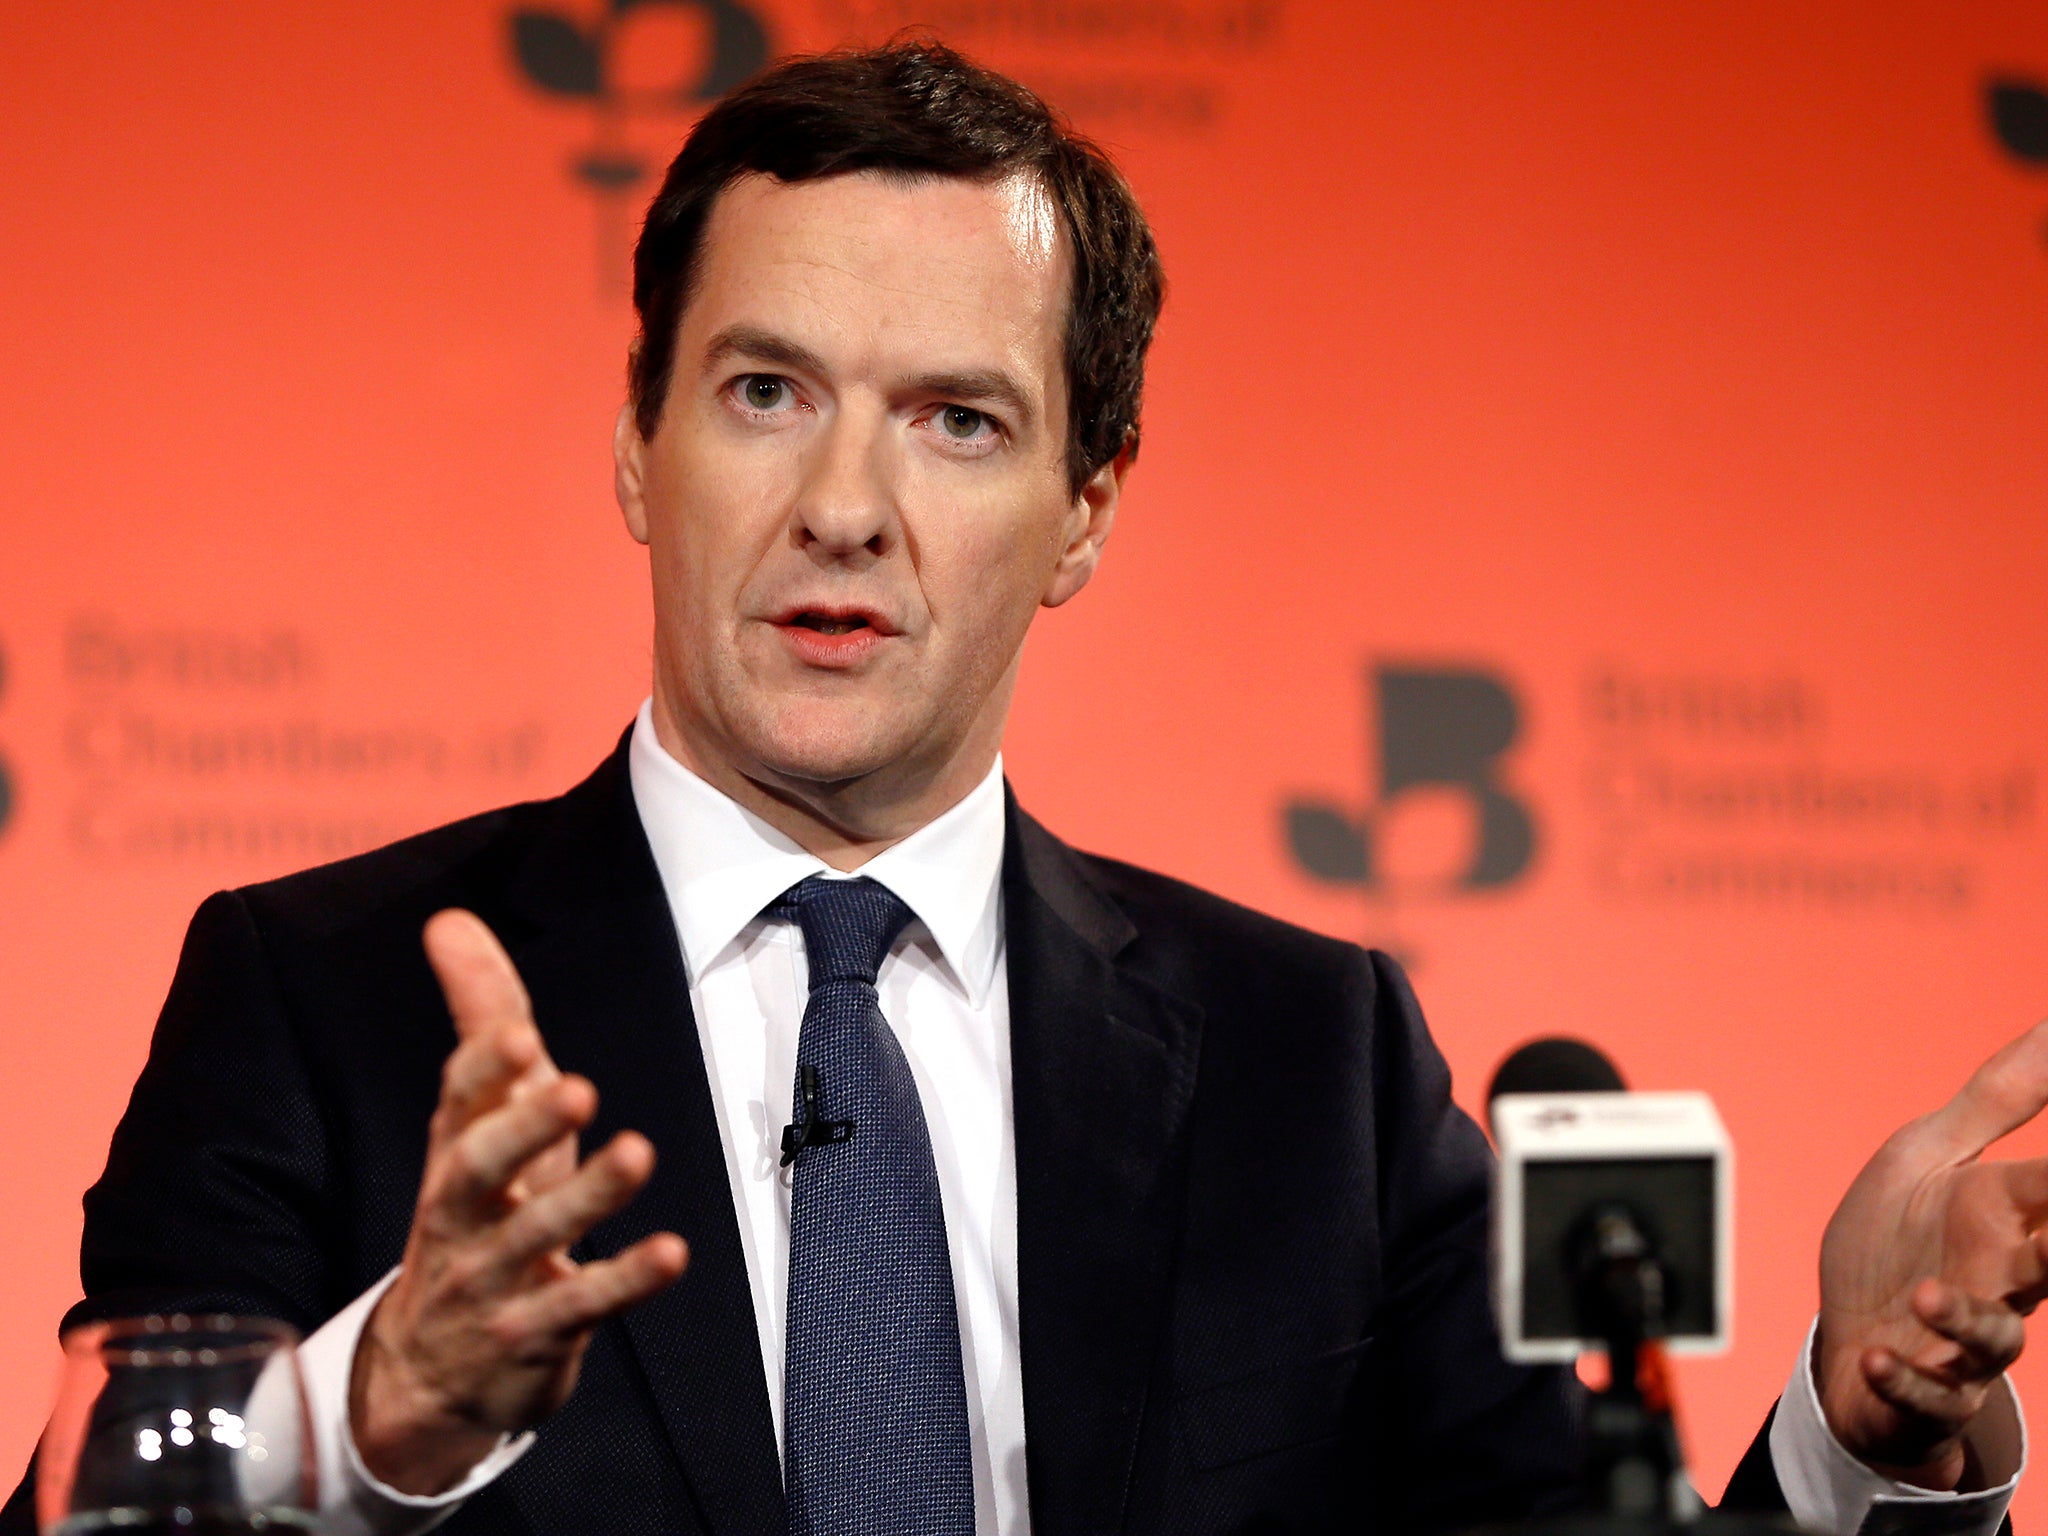 George Osborne speaks during the British Chambers of Commerce annual conference in London